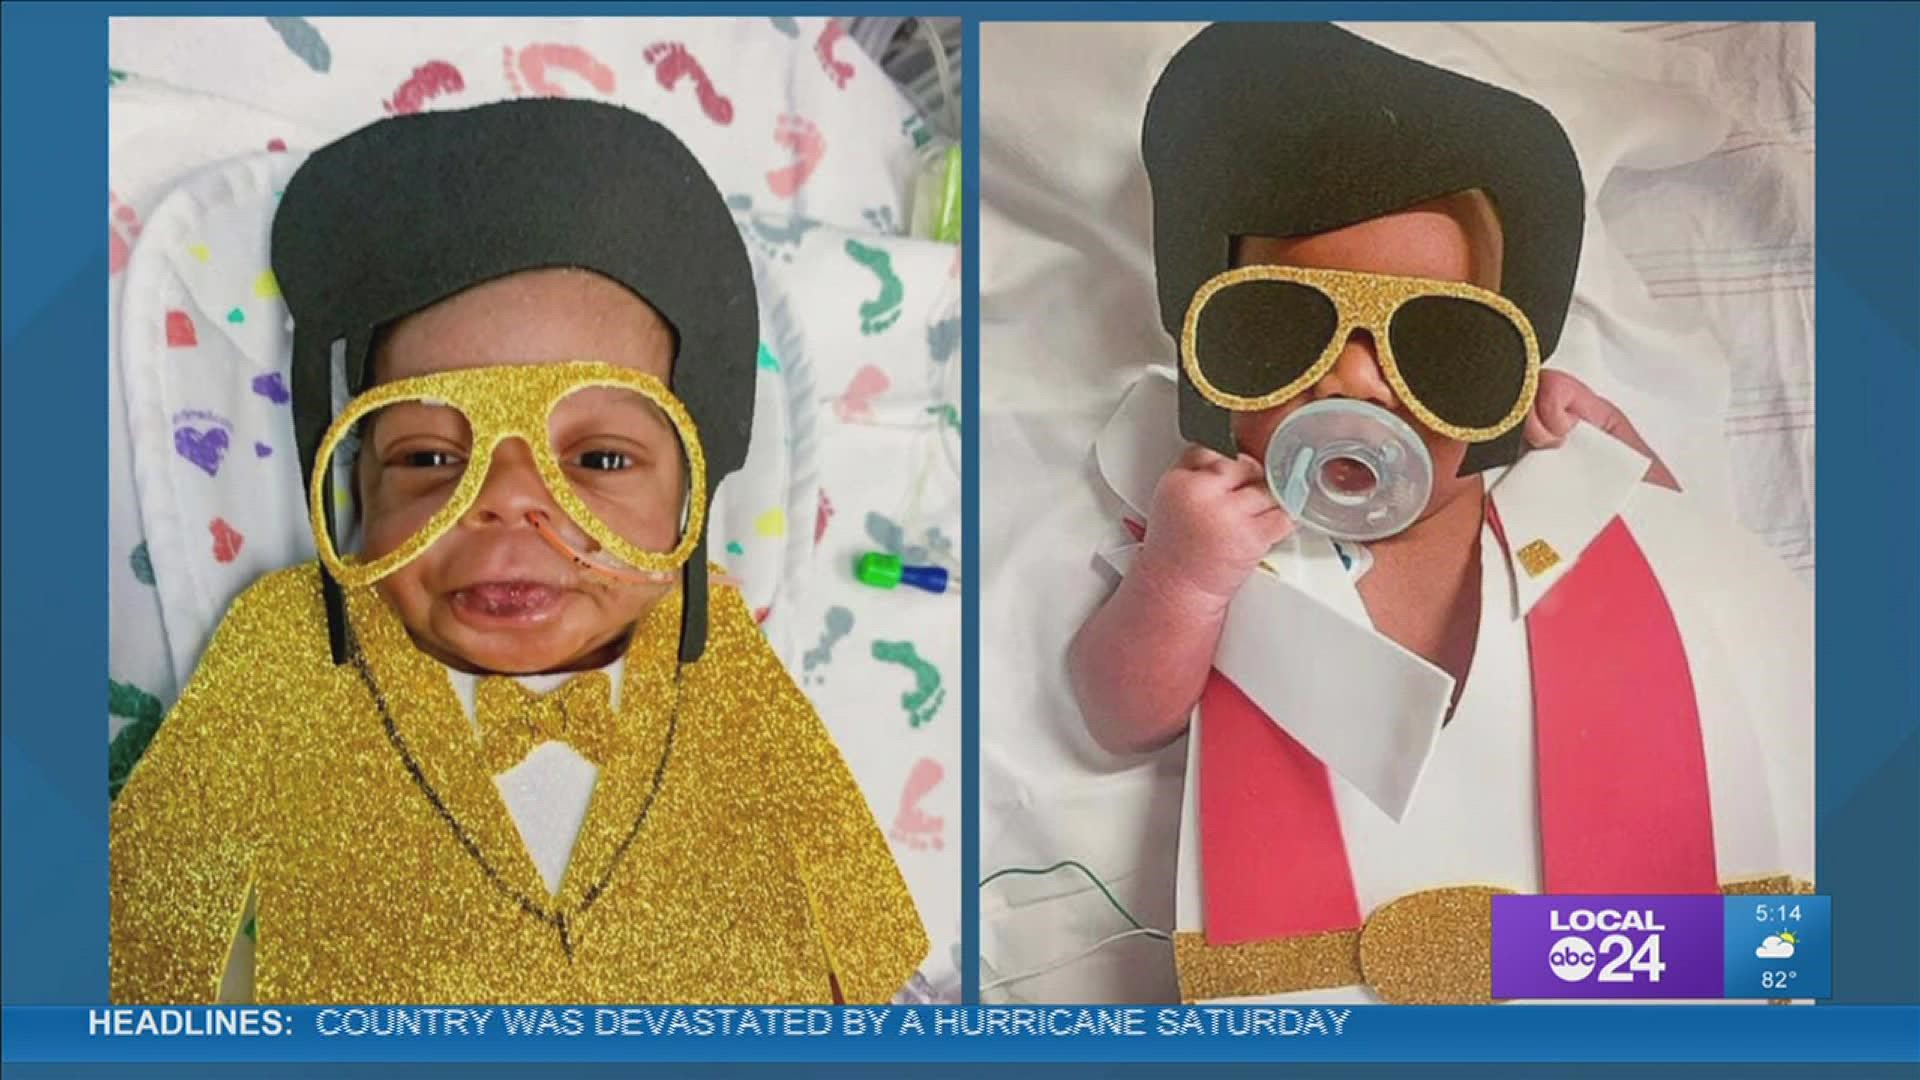 Check out these adorable babies dressed up as the King of Rock n' Roll.